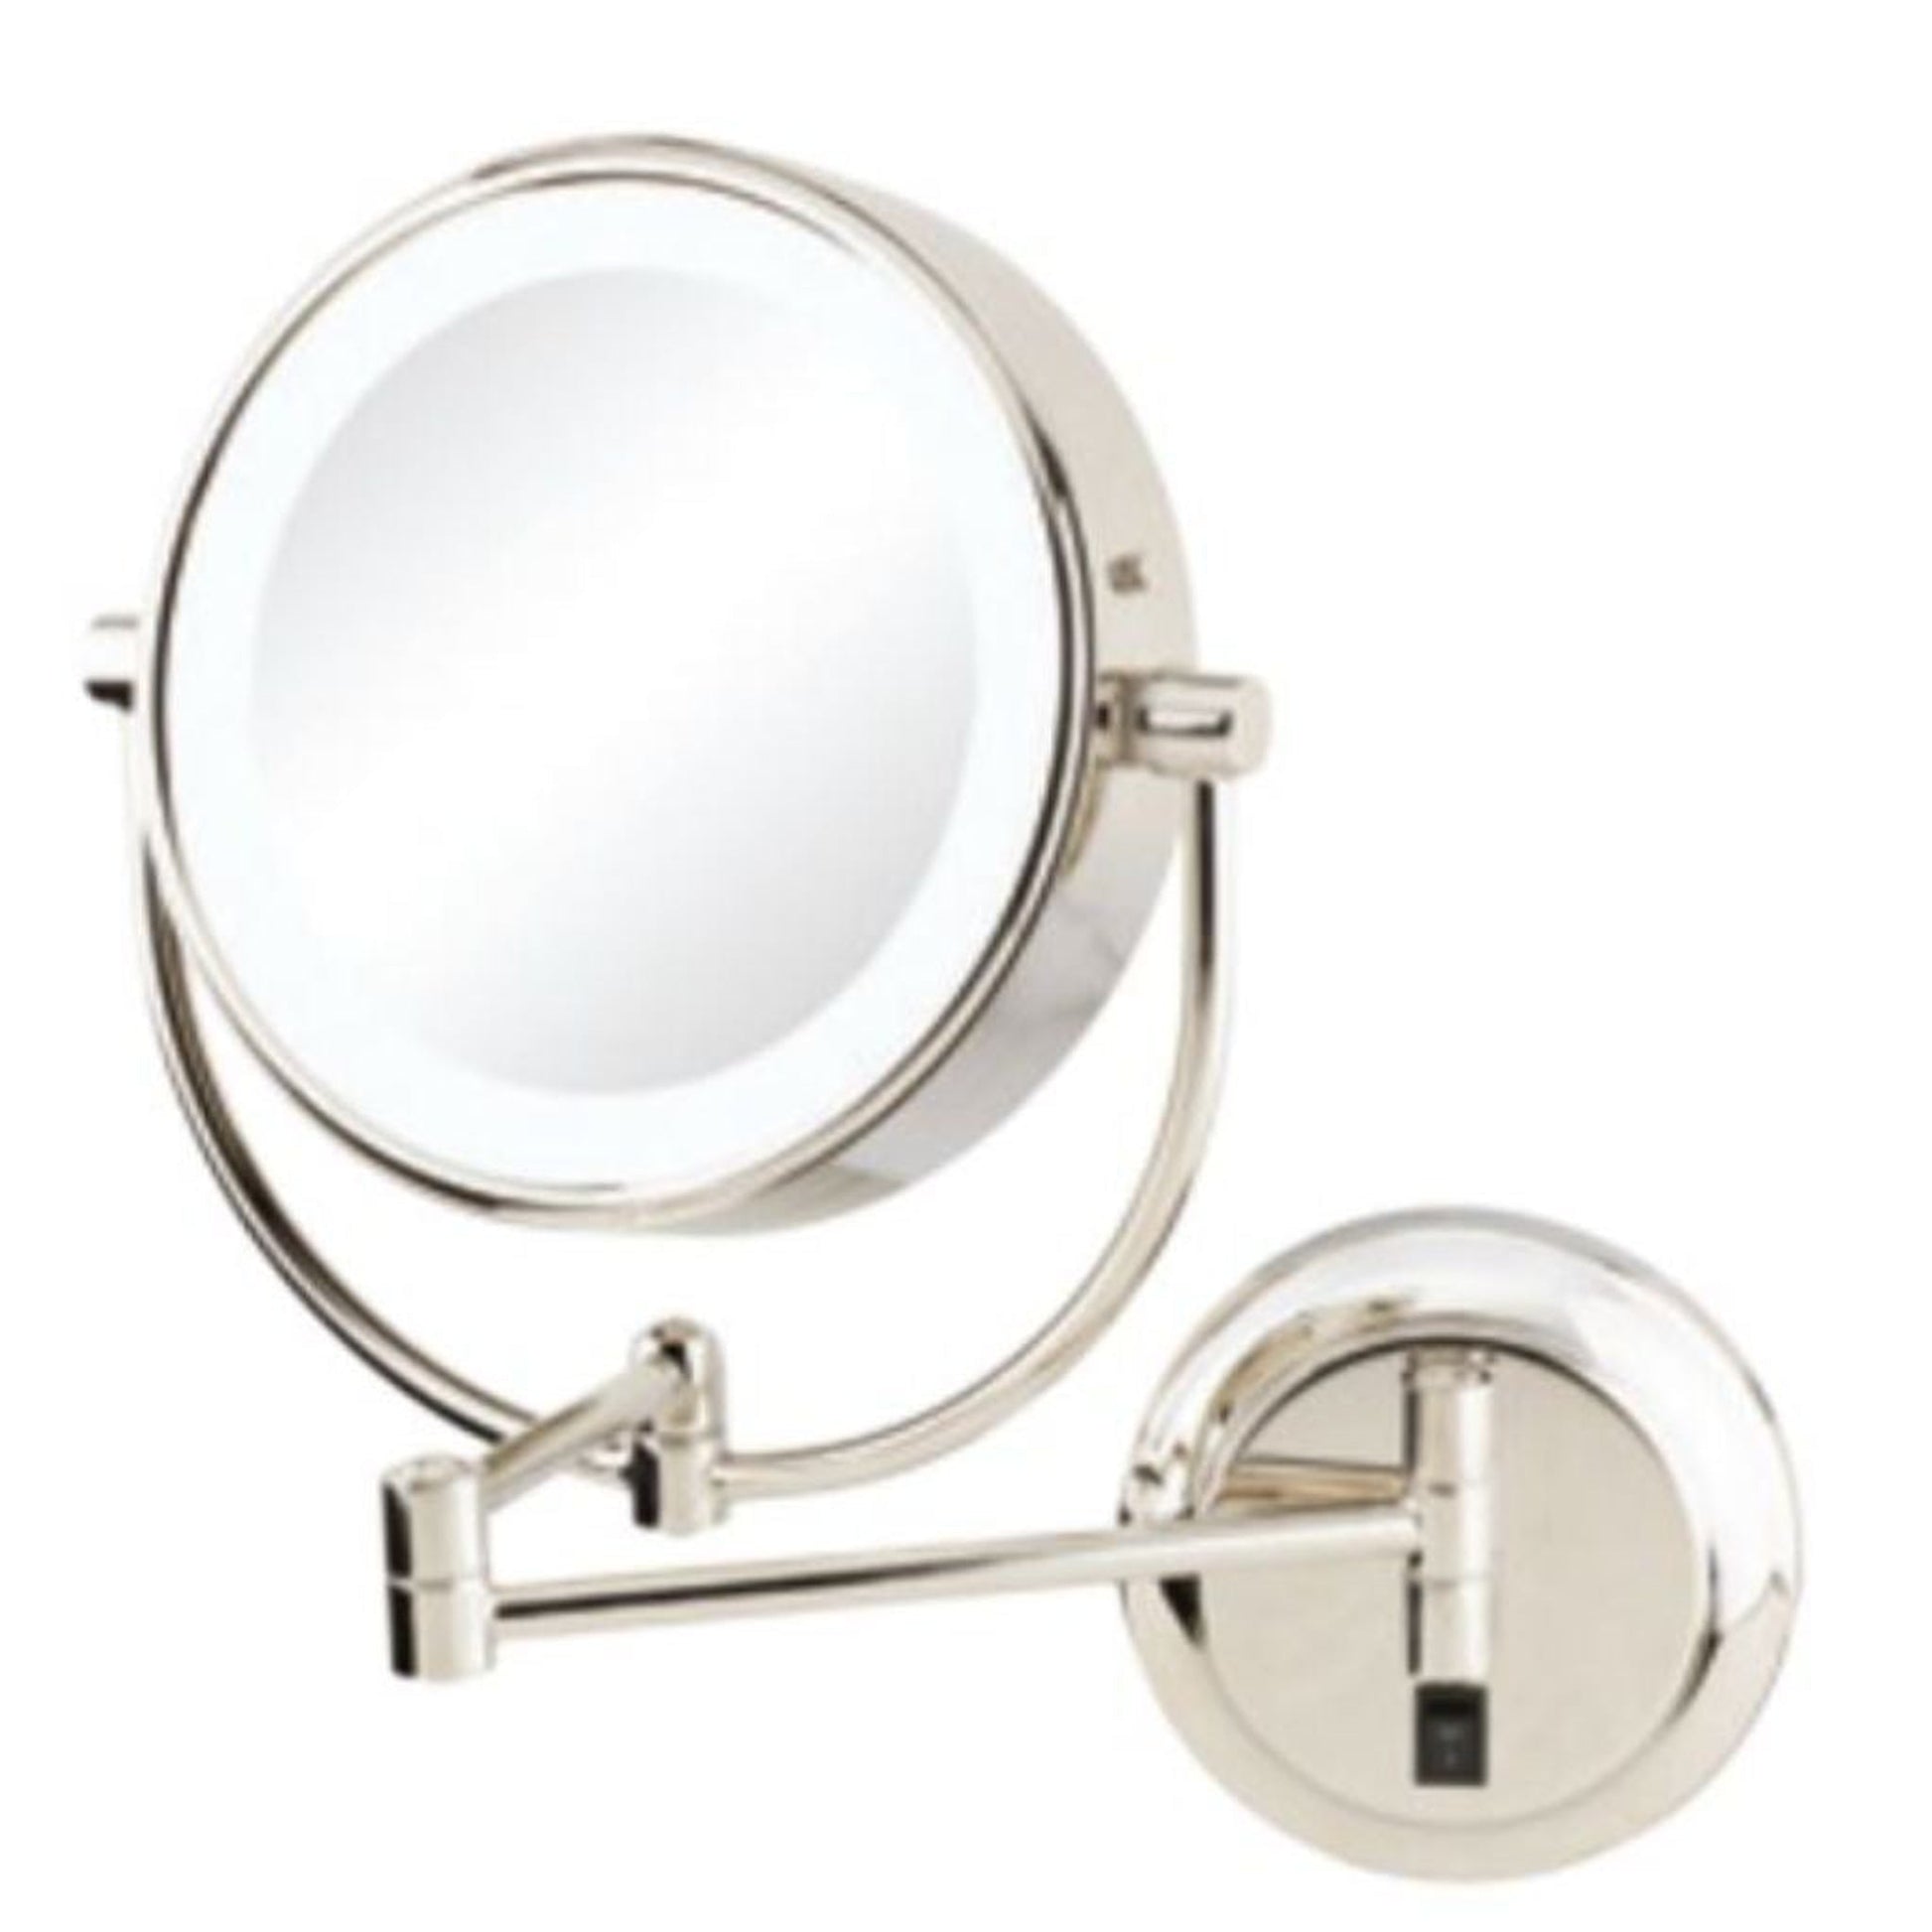 Aptations Kimball & Young 12" x 14" Polished Nickel Wall-Mounted NeoModern Hardwired 1X/5X Magnified Makeup Mirror With Switchable 3,500K Warm White and 5,500K Cool White LED Light Color